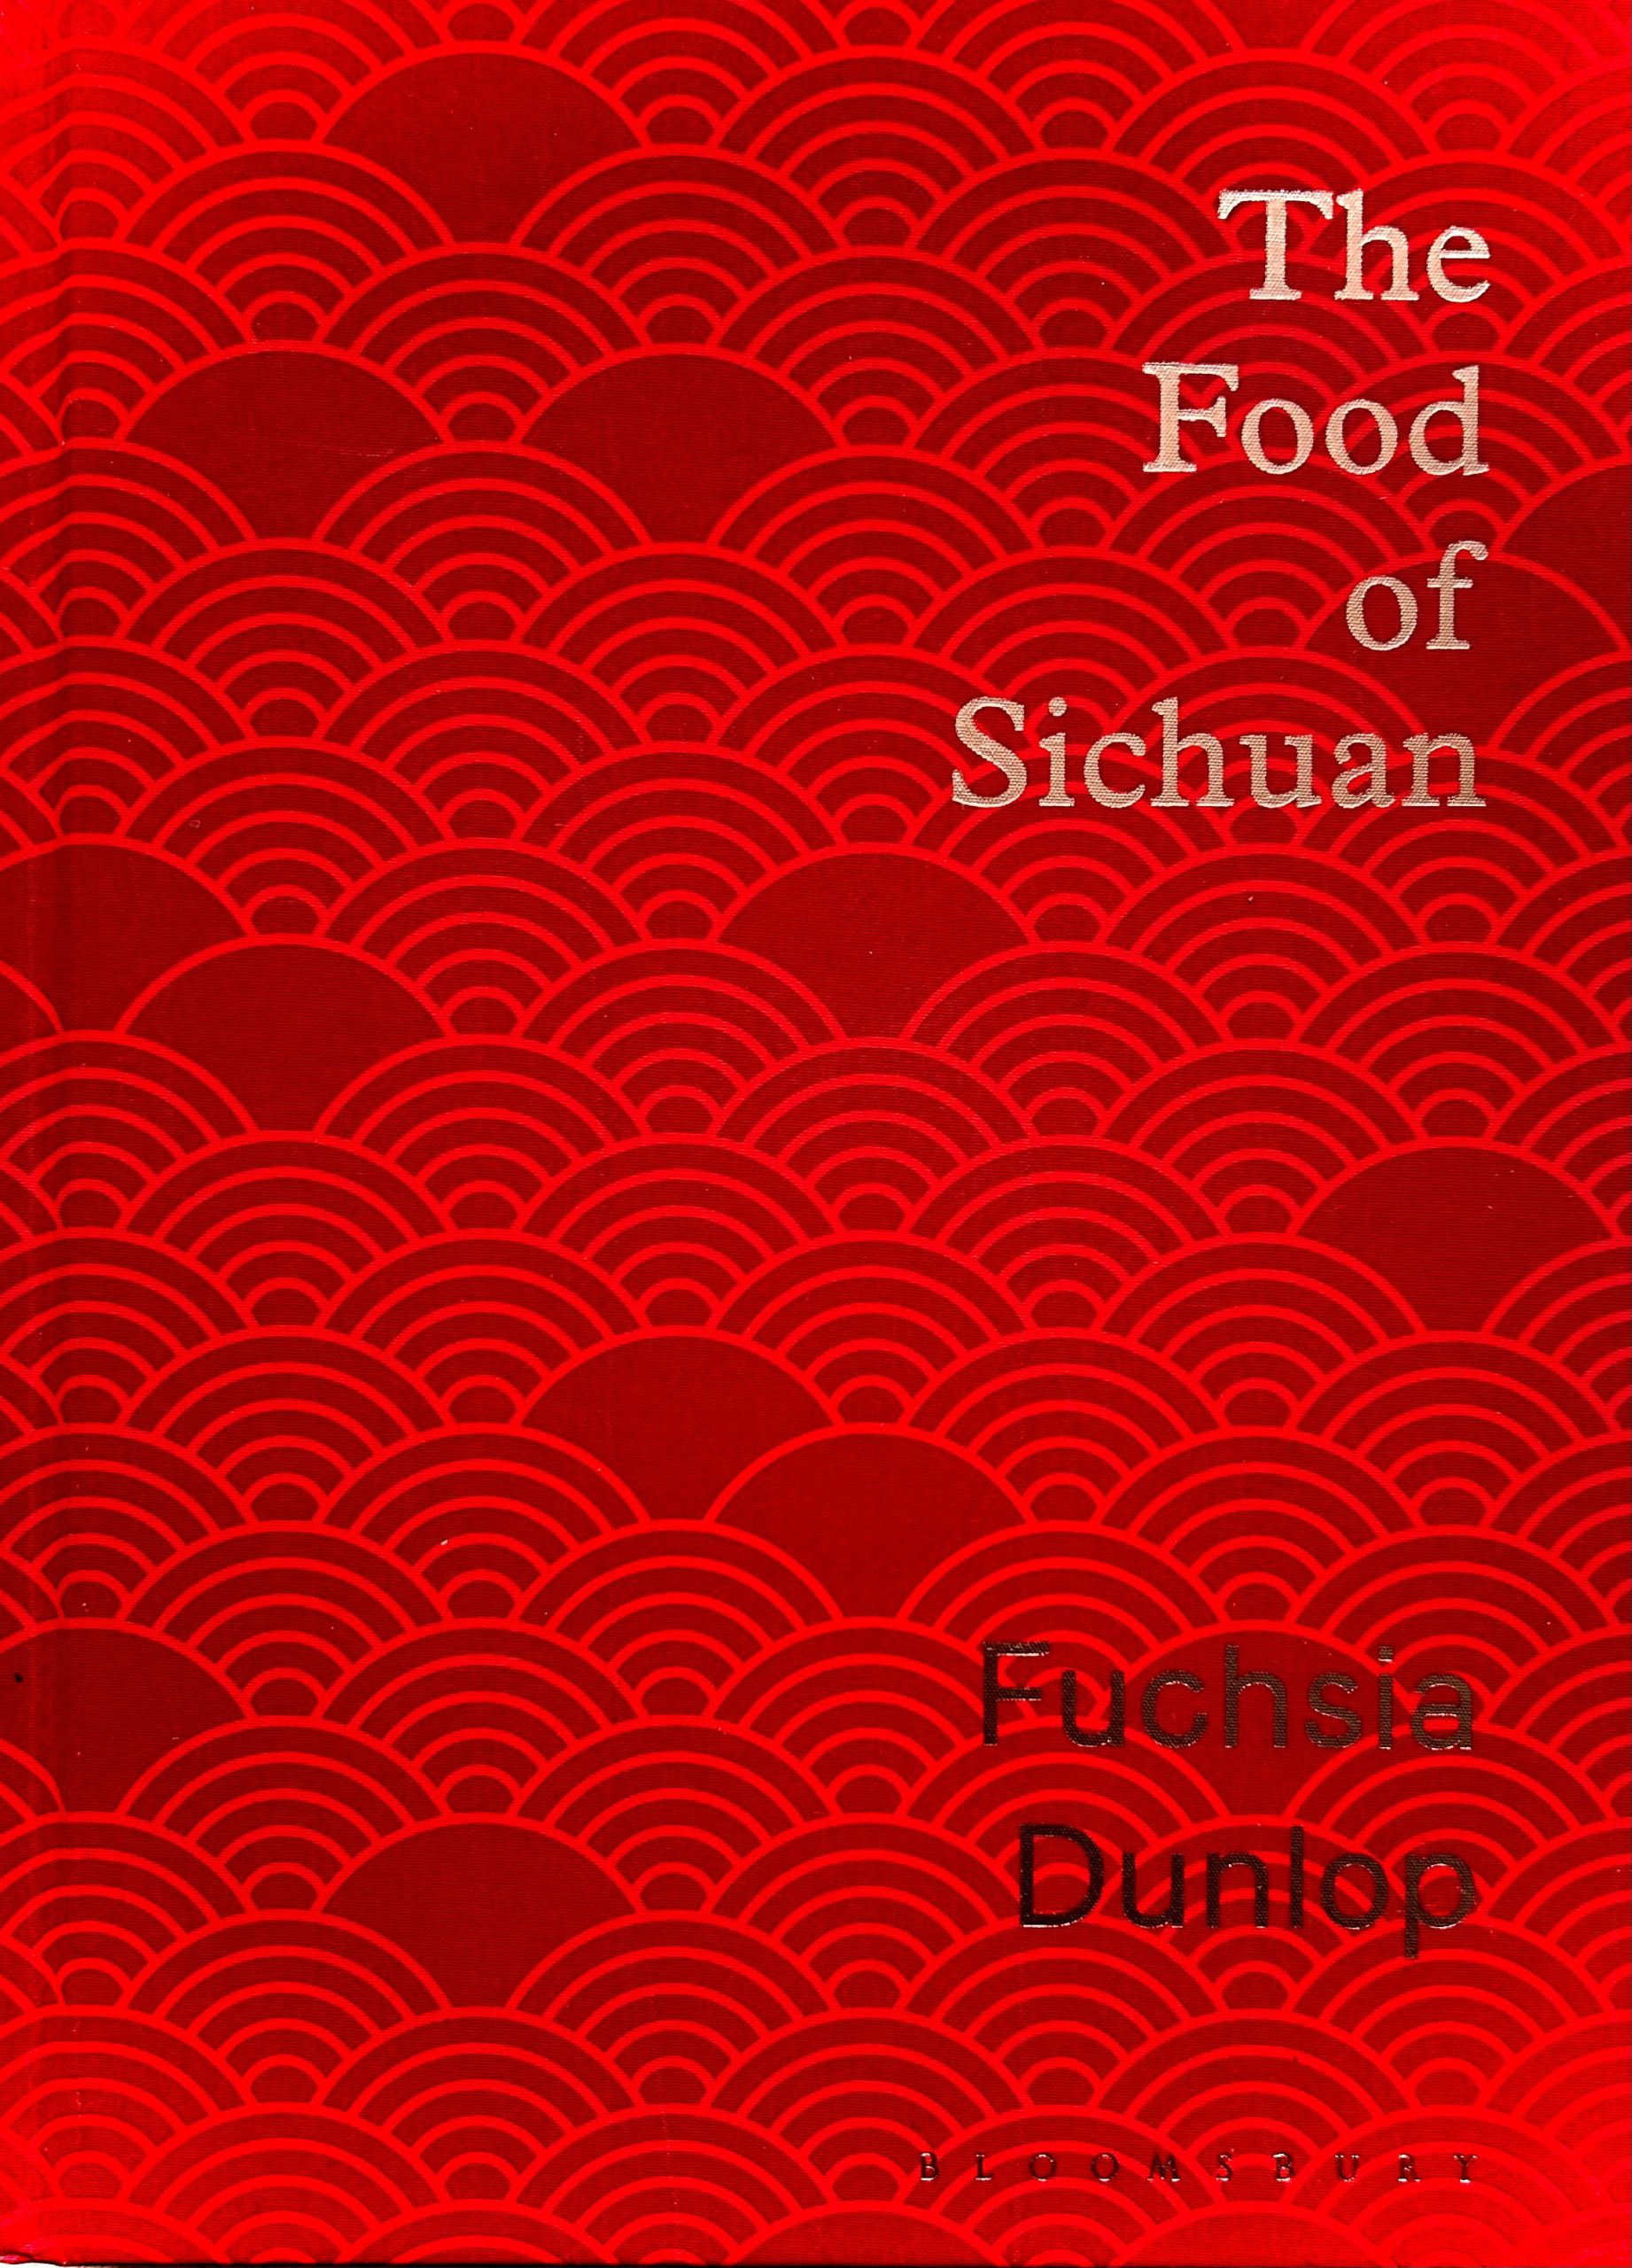 The Food Of Sichuan by Fuchsia Dunlop